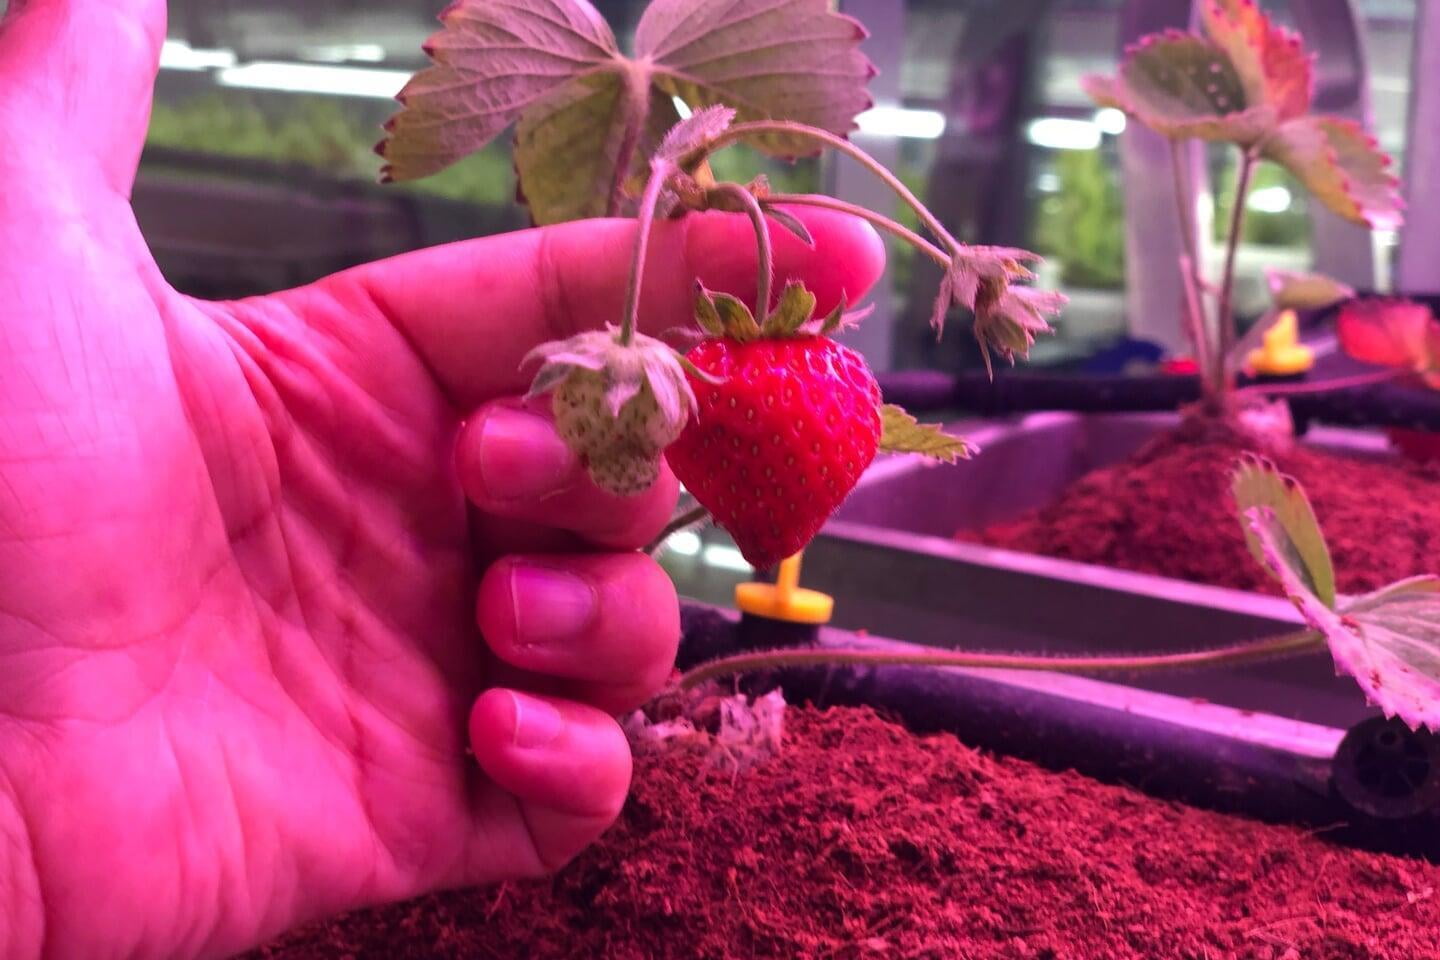 How to grow Strawberry in your Home Garden